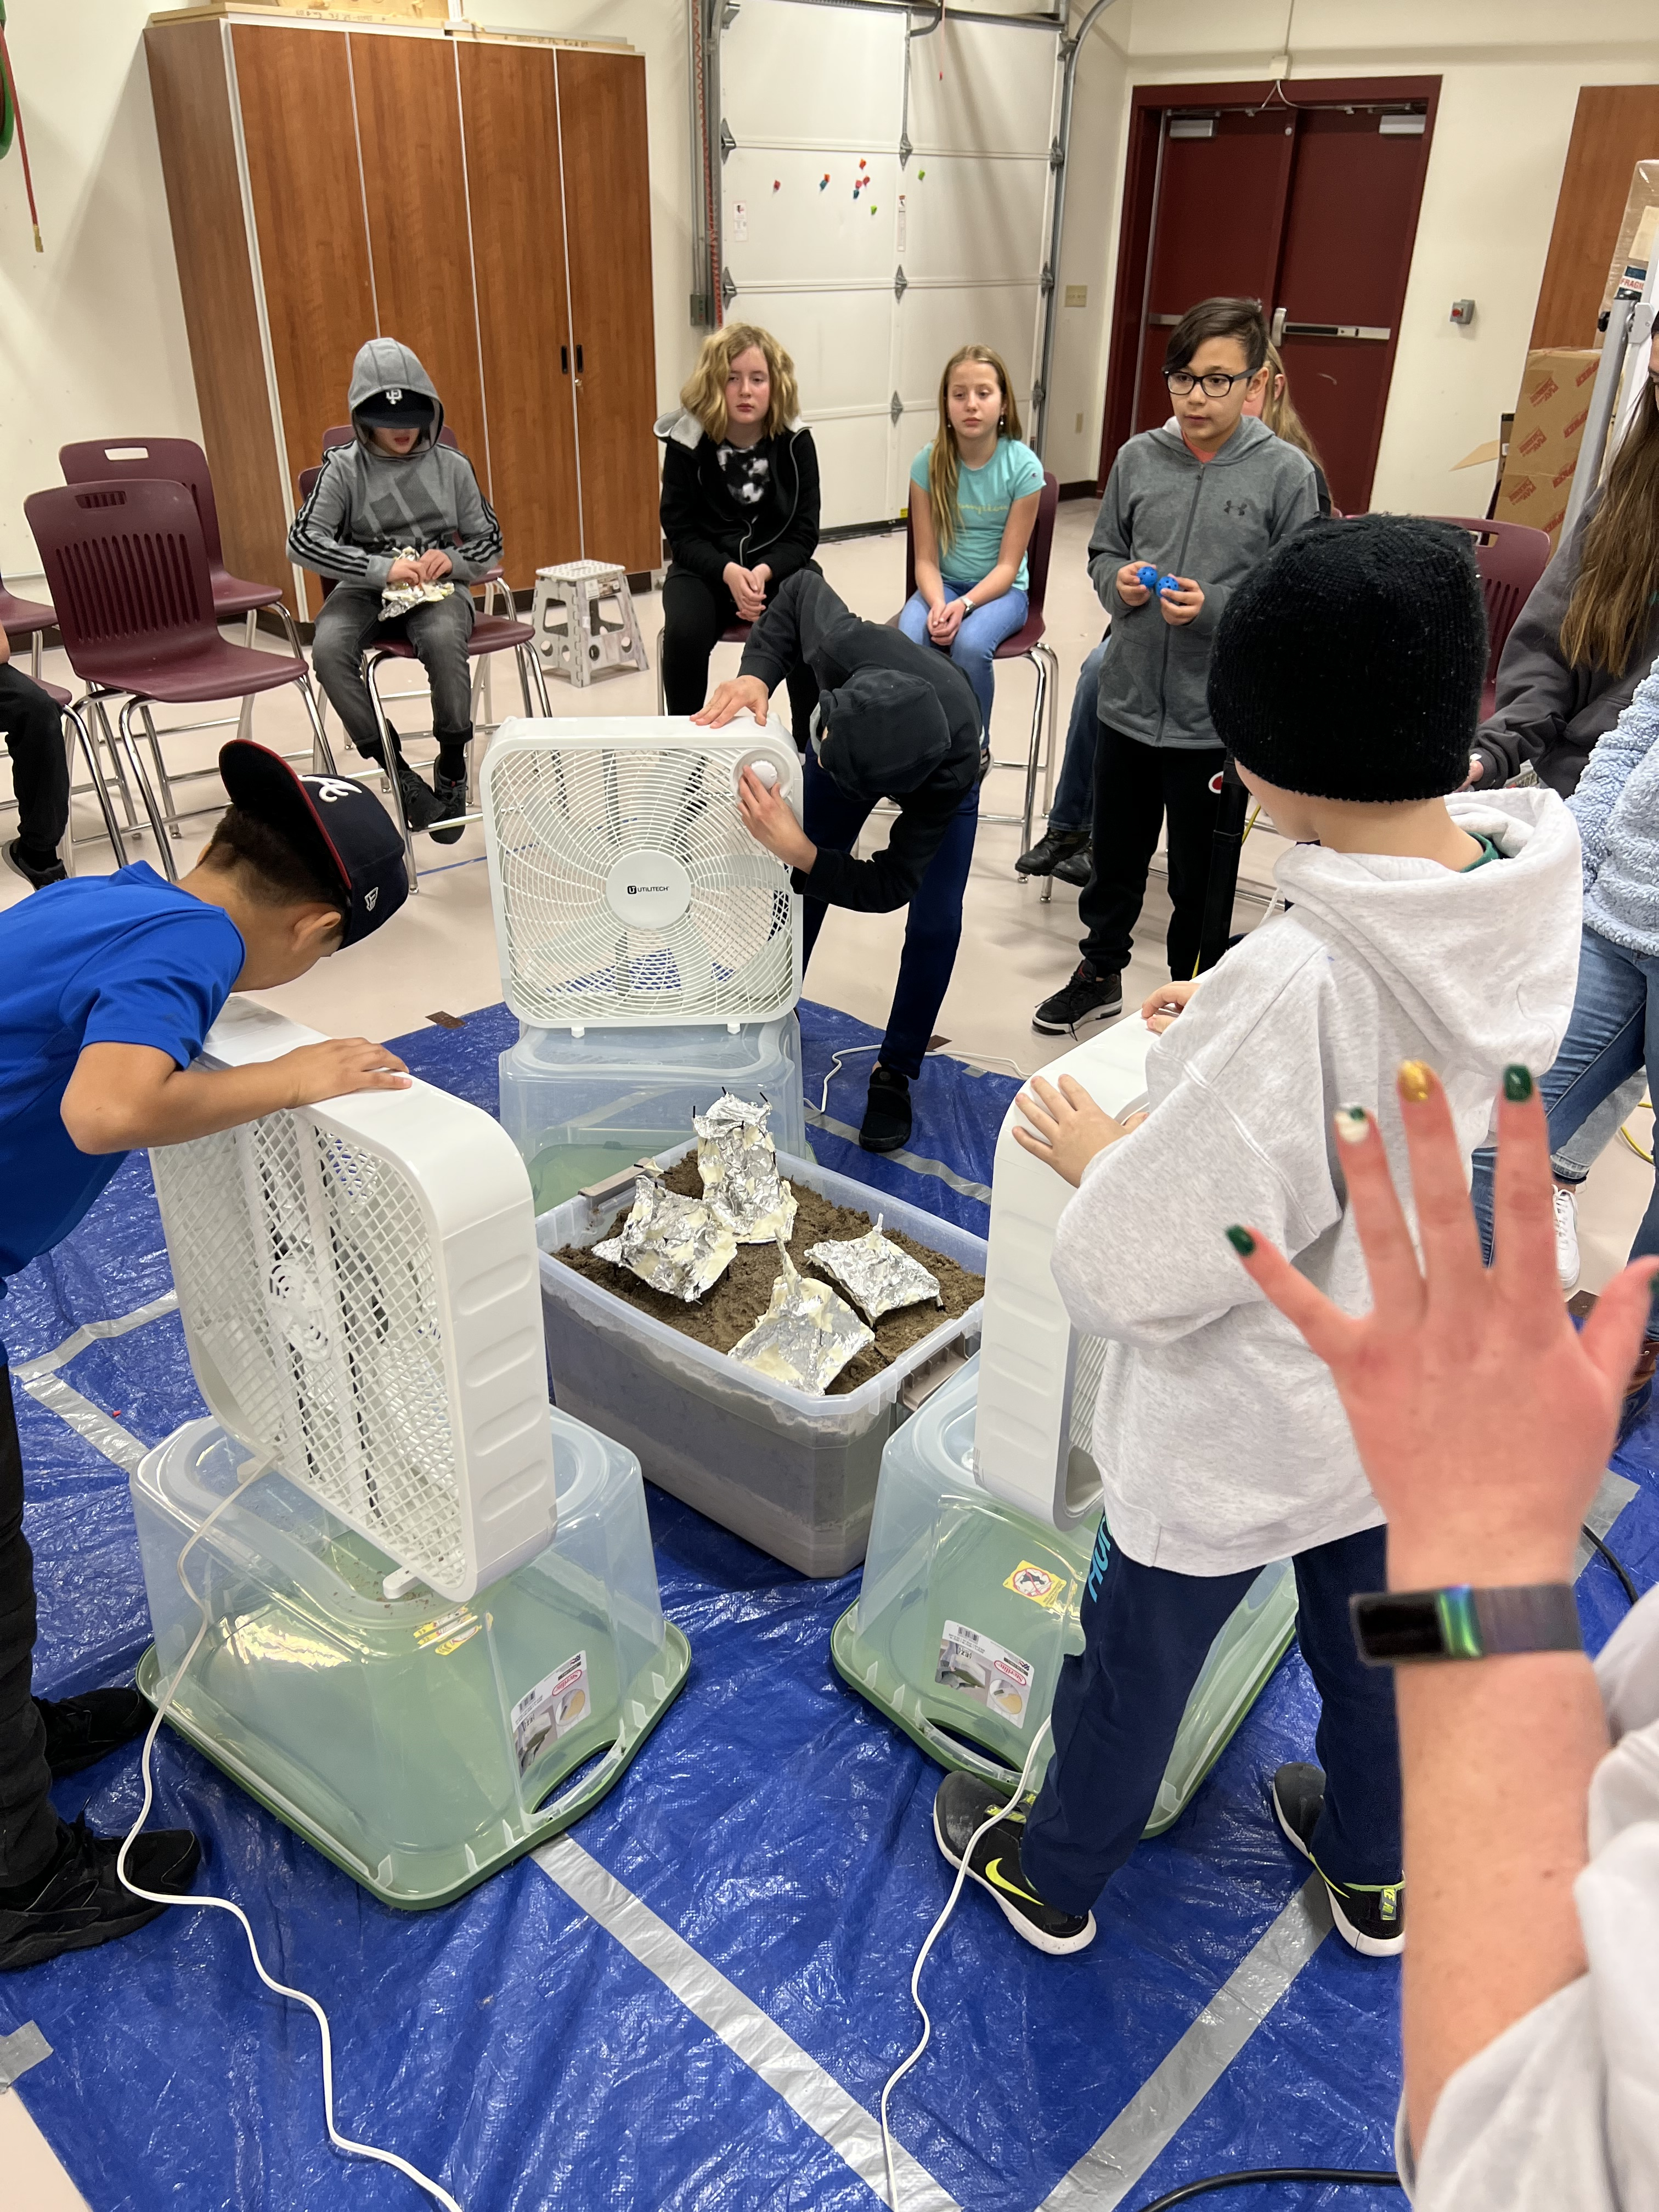 Students using fans to simulate hurricanes on cardboard houses